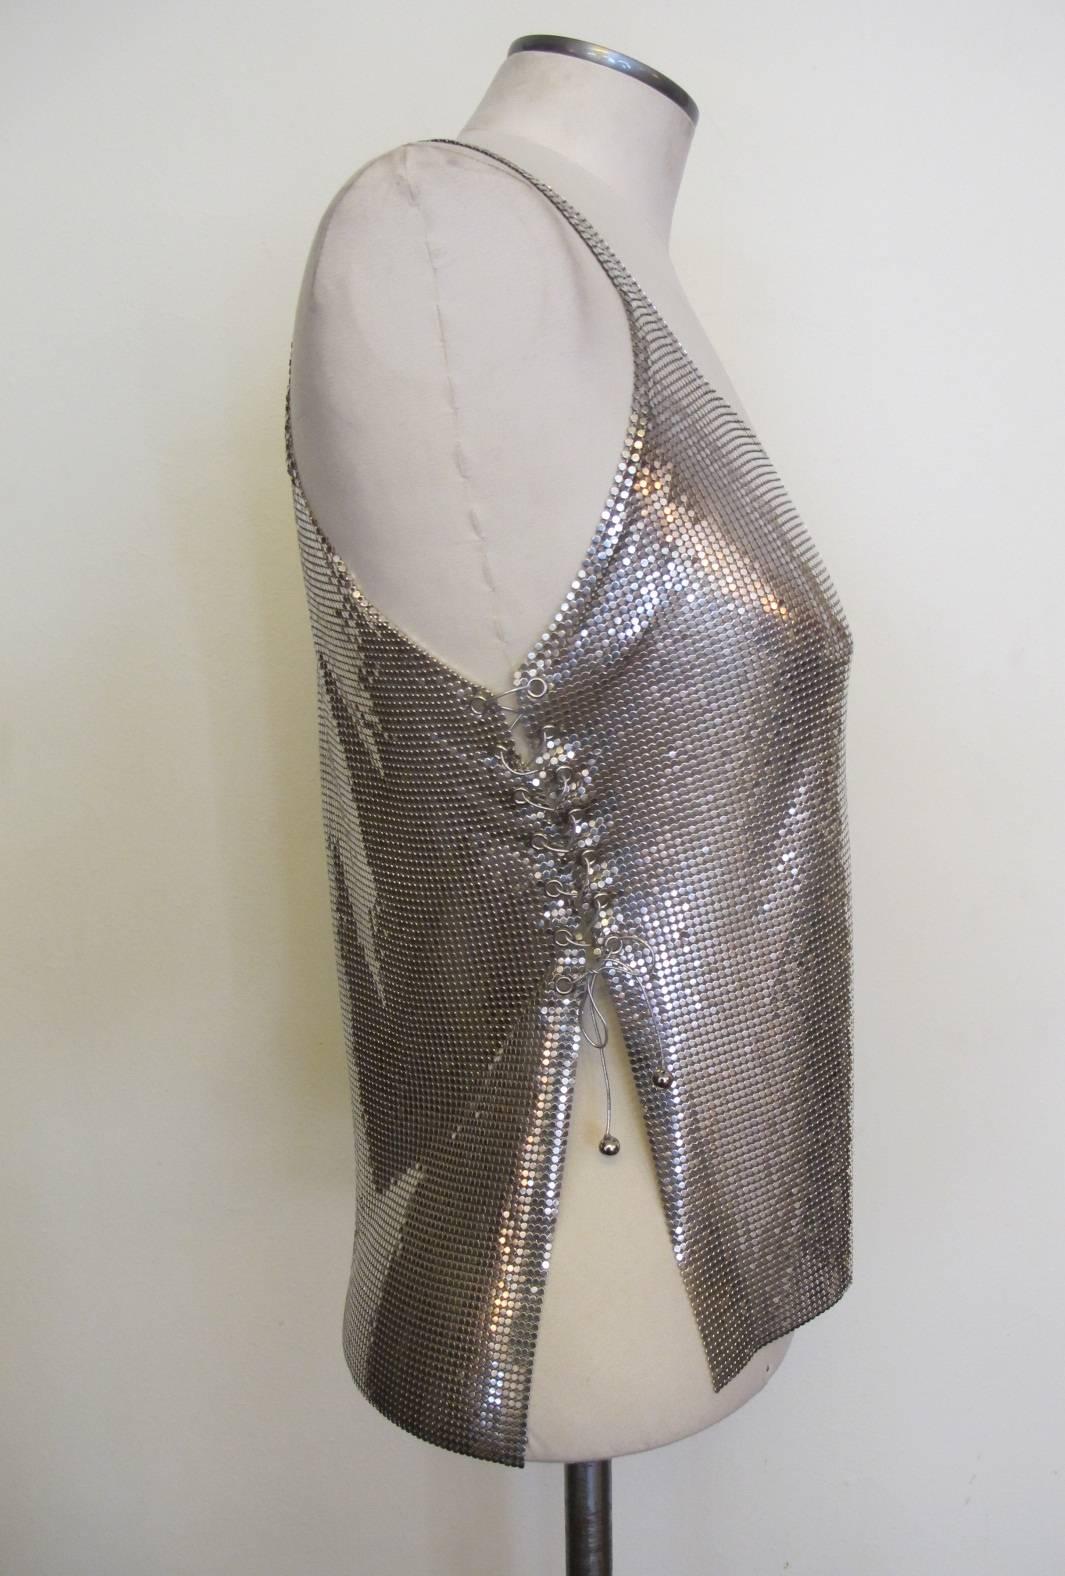 Women's Paco Rabanne Chic Silver Metal Mesh Sleeveless Tank Top For Sale